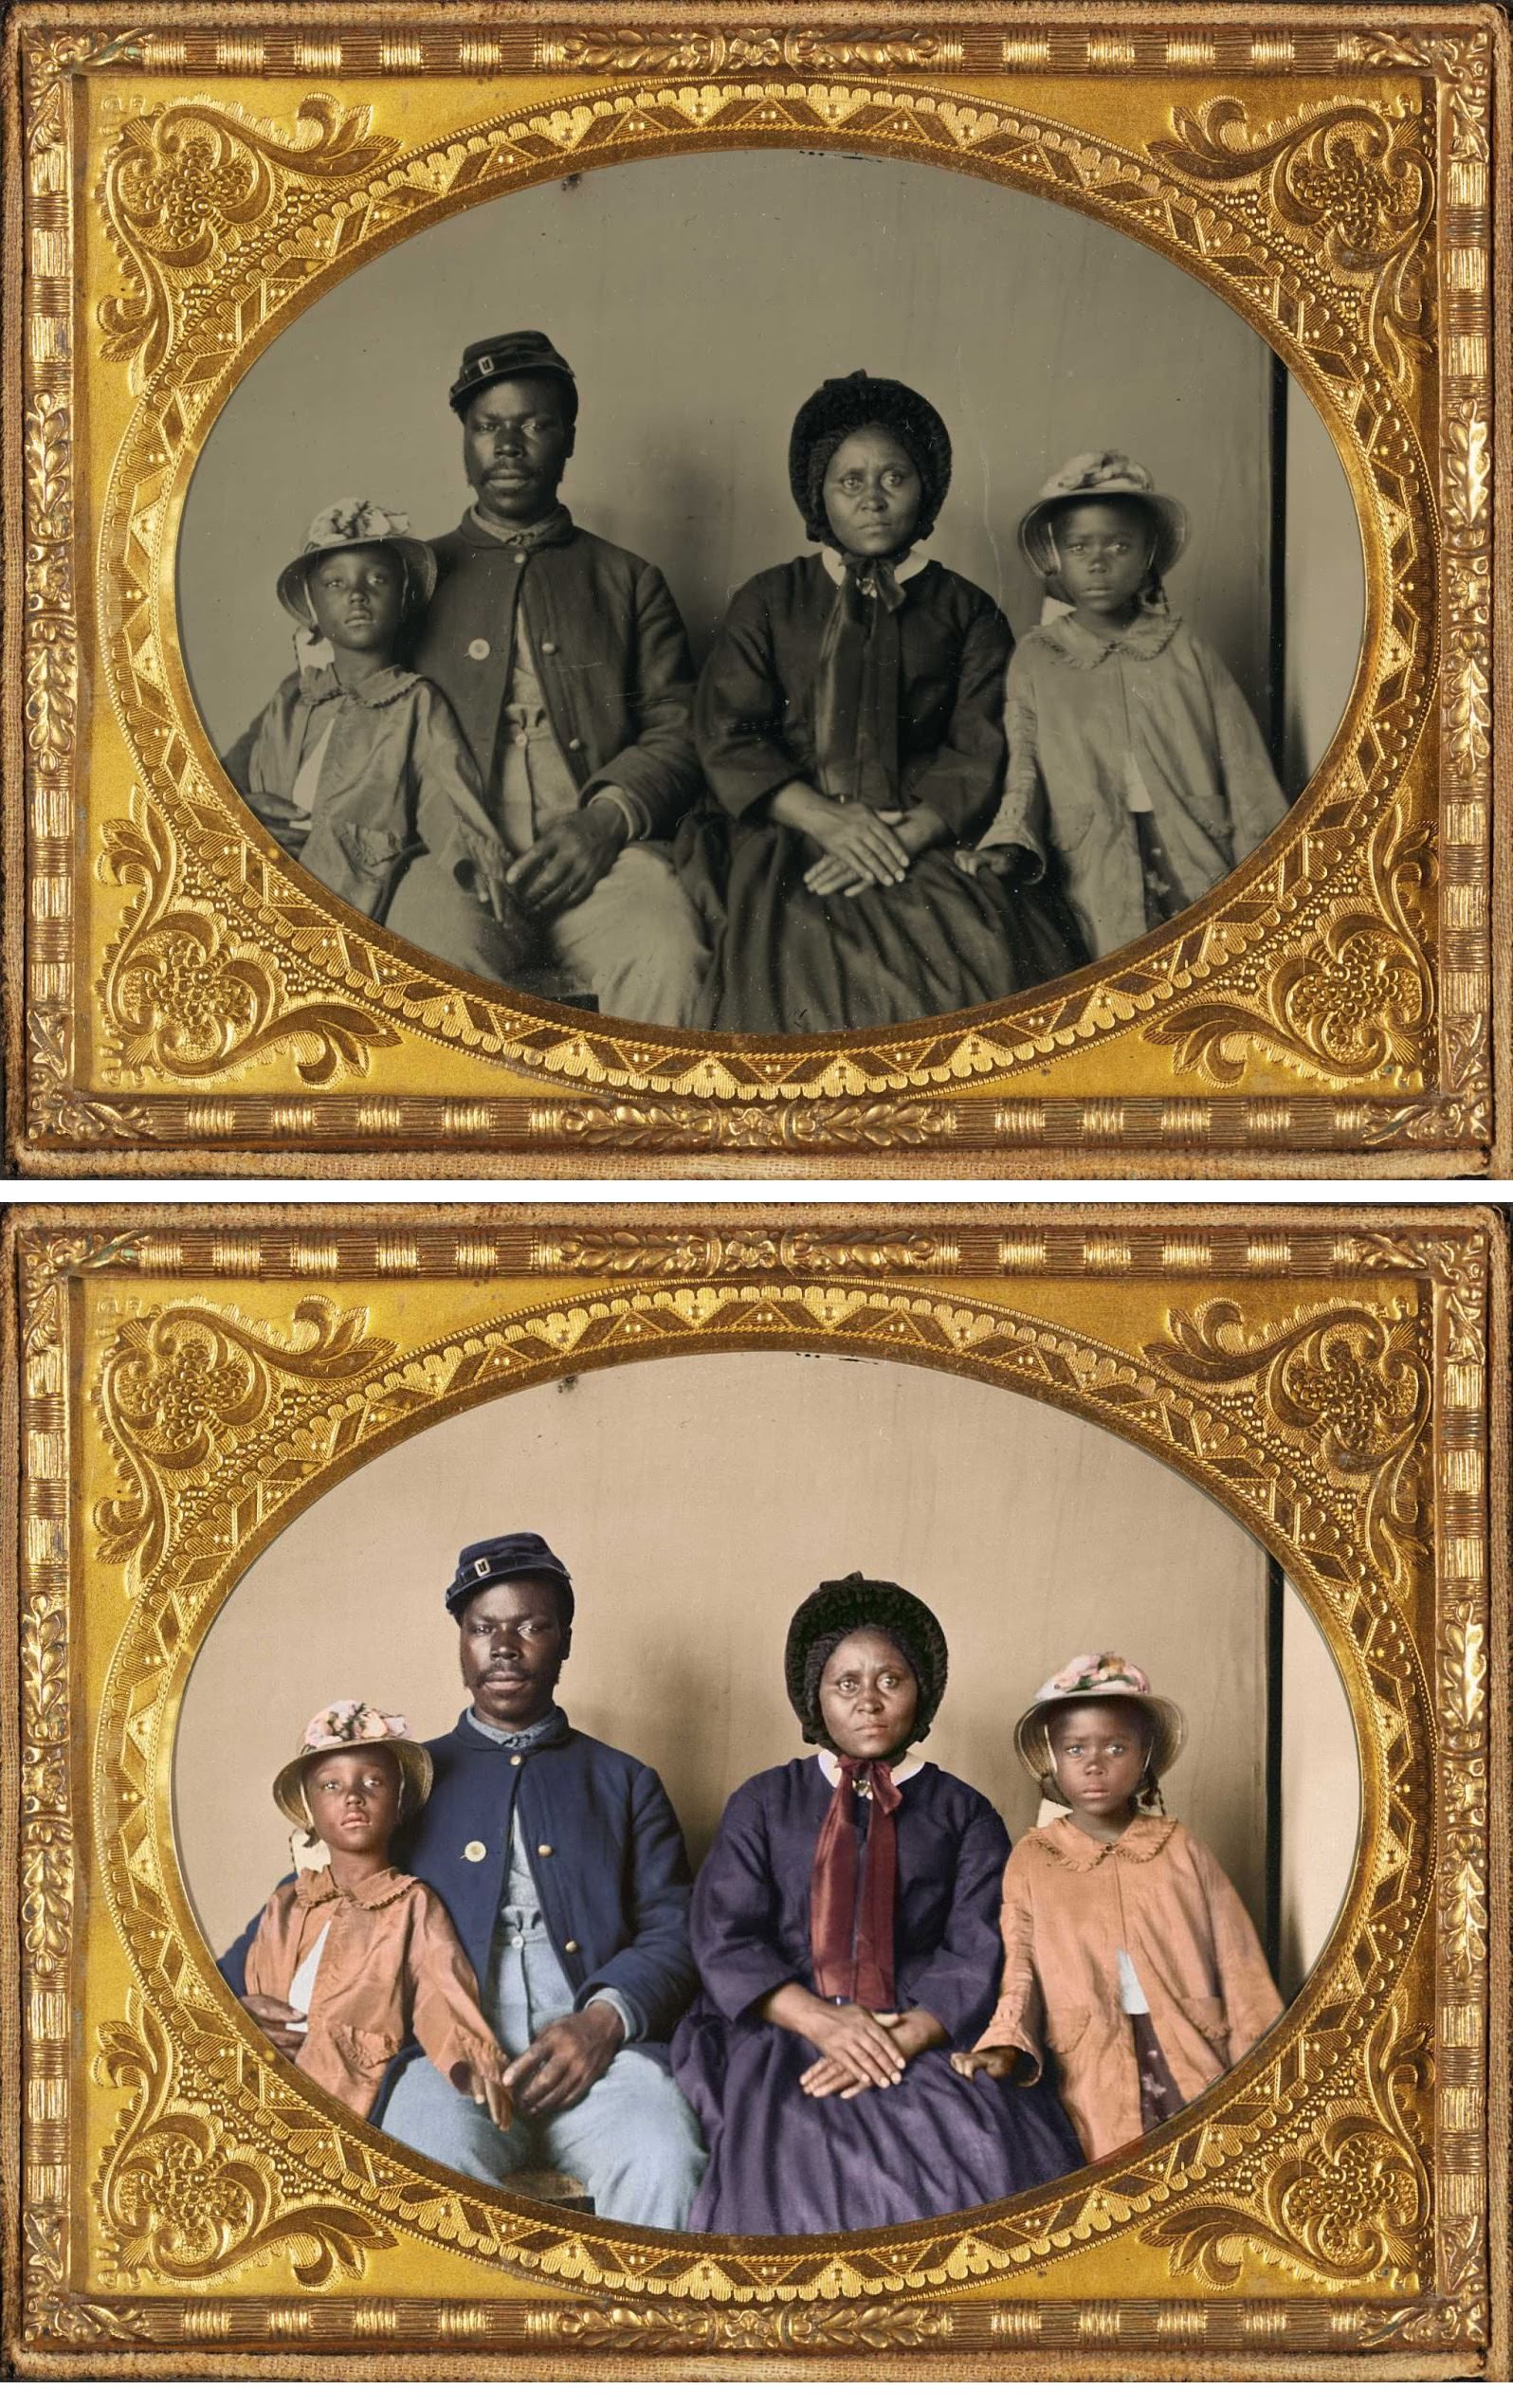 Unidentified African American soldier in Union uniform with wife and two daughters, 1863-1865.